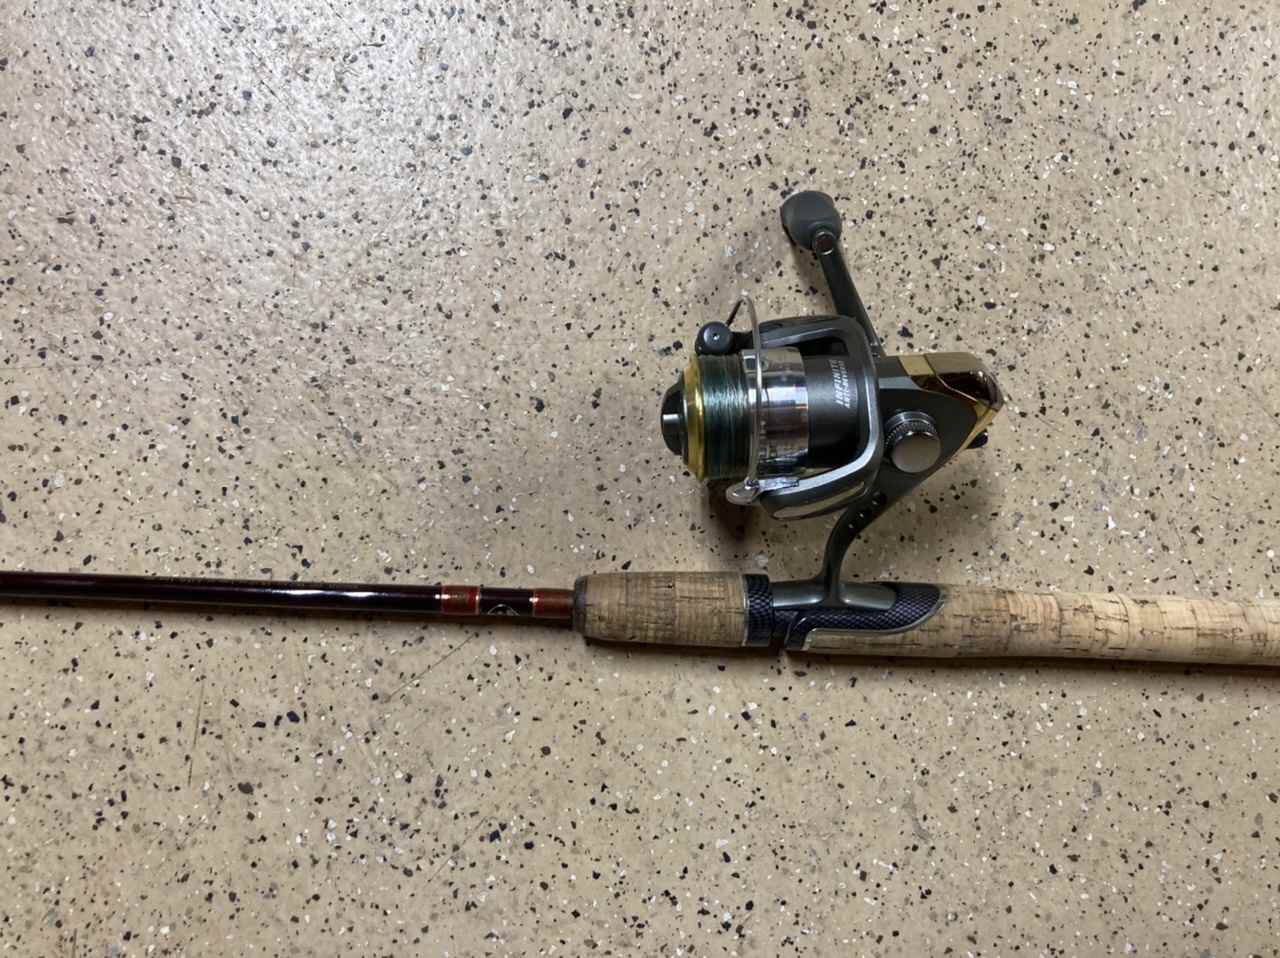 Did I blow out my reel? - Fishing Rods, Reels, Line, and Knots